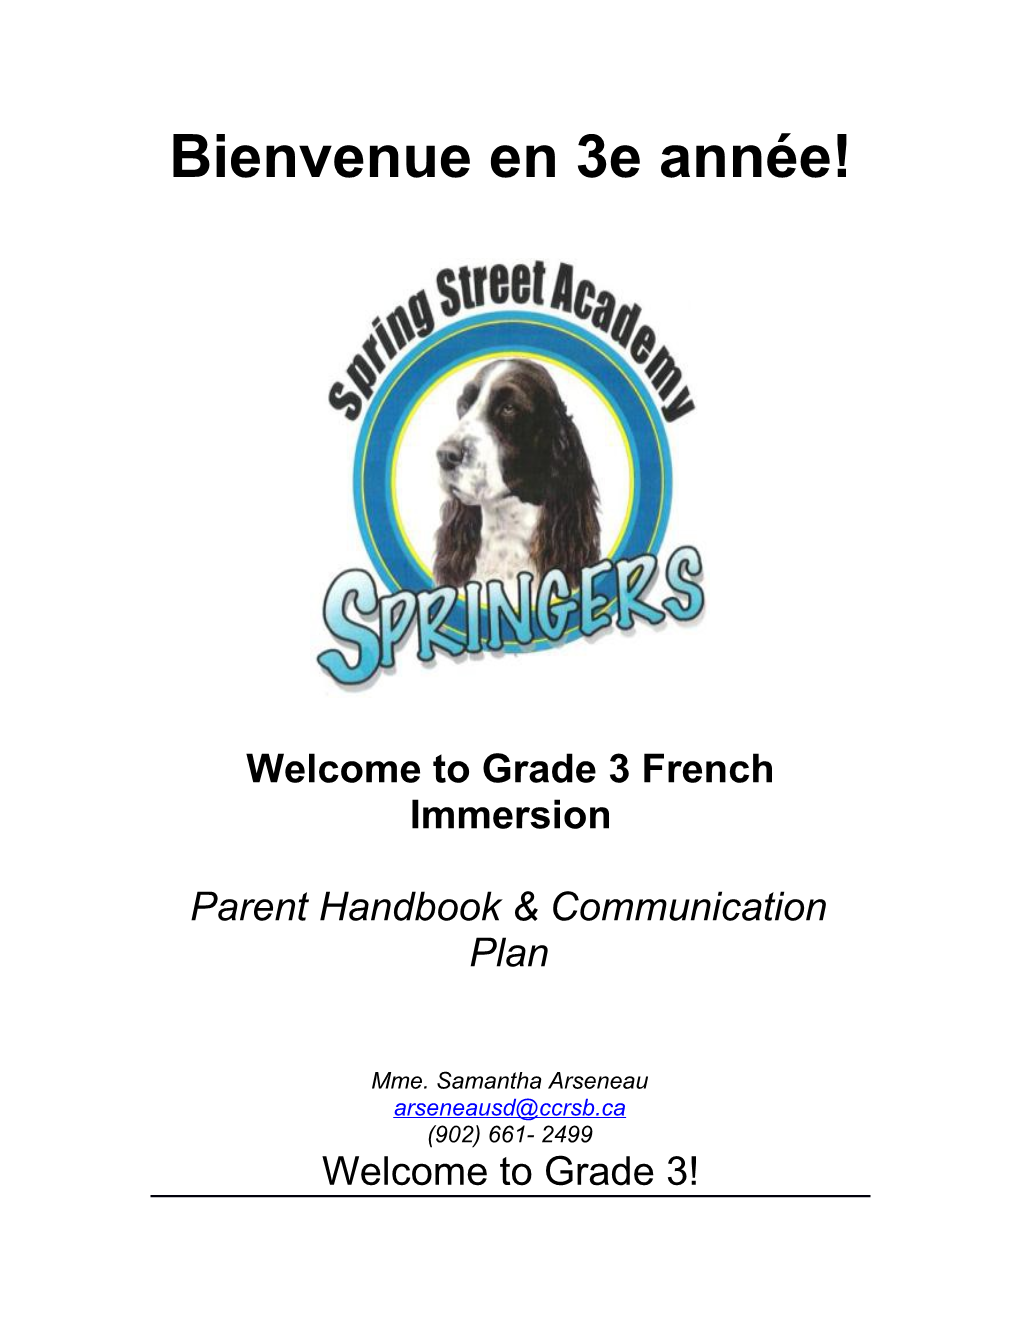 Welcome to Grade 3 French Immersion